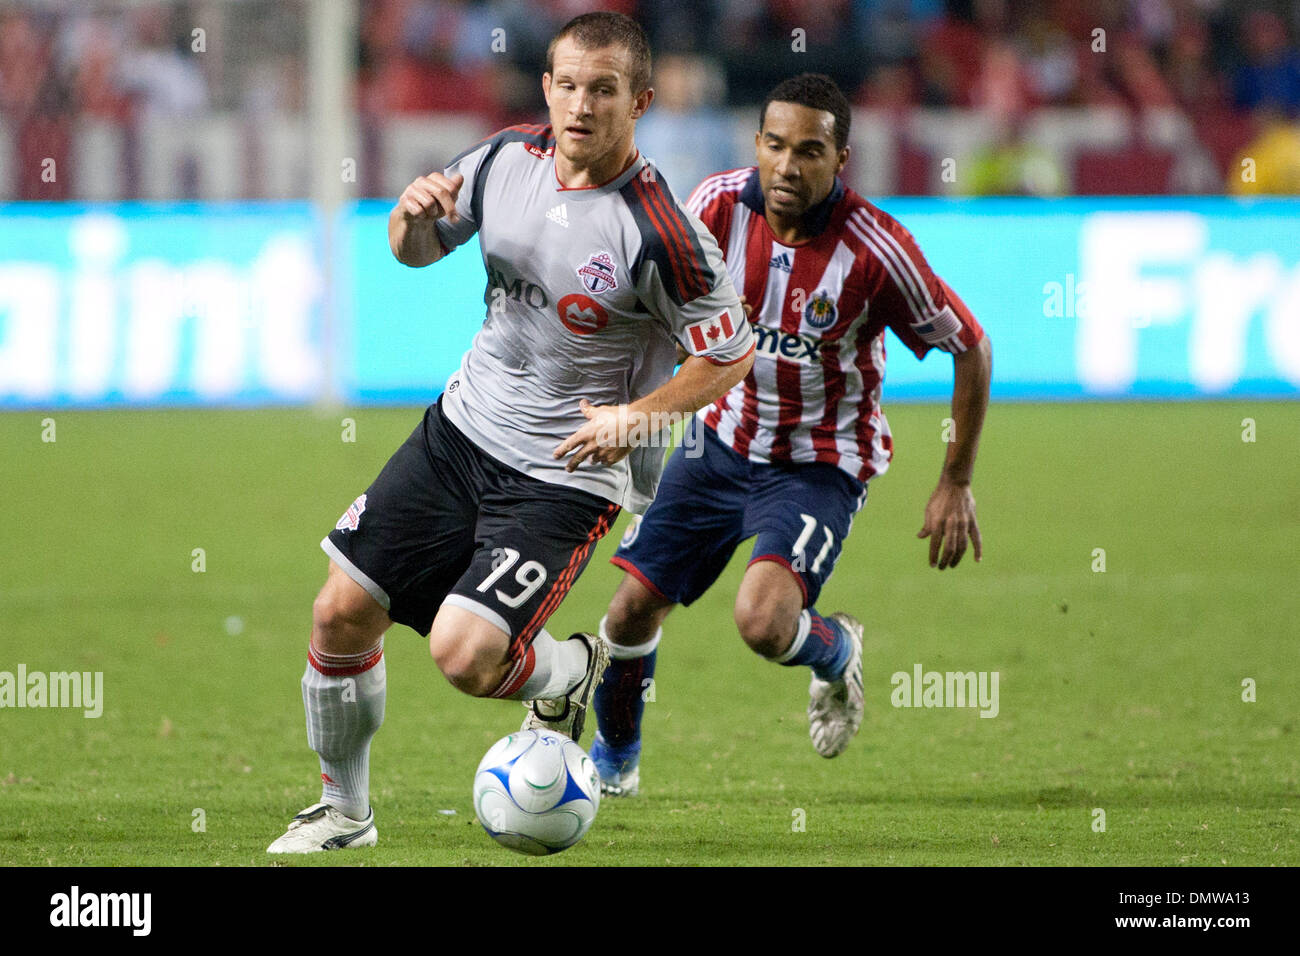 Aug. 22, 2009 - Carson, California, U.S - Chad Barrett (L) dribbles away from Maykel Galindo (R) during the MLS game between Toronto FC and Chivas USA at the Home Depot Center. (Credit Image: © Brandon Parry/Southcreek Global/ZUMAPRESS.com) Stock Photo